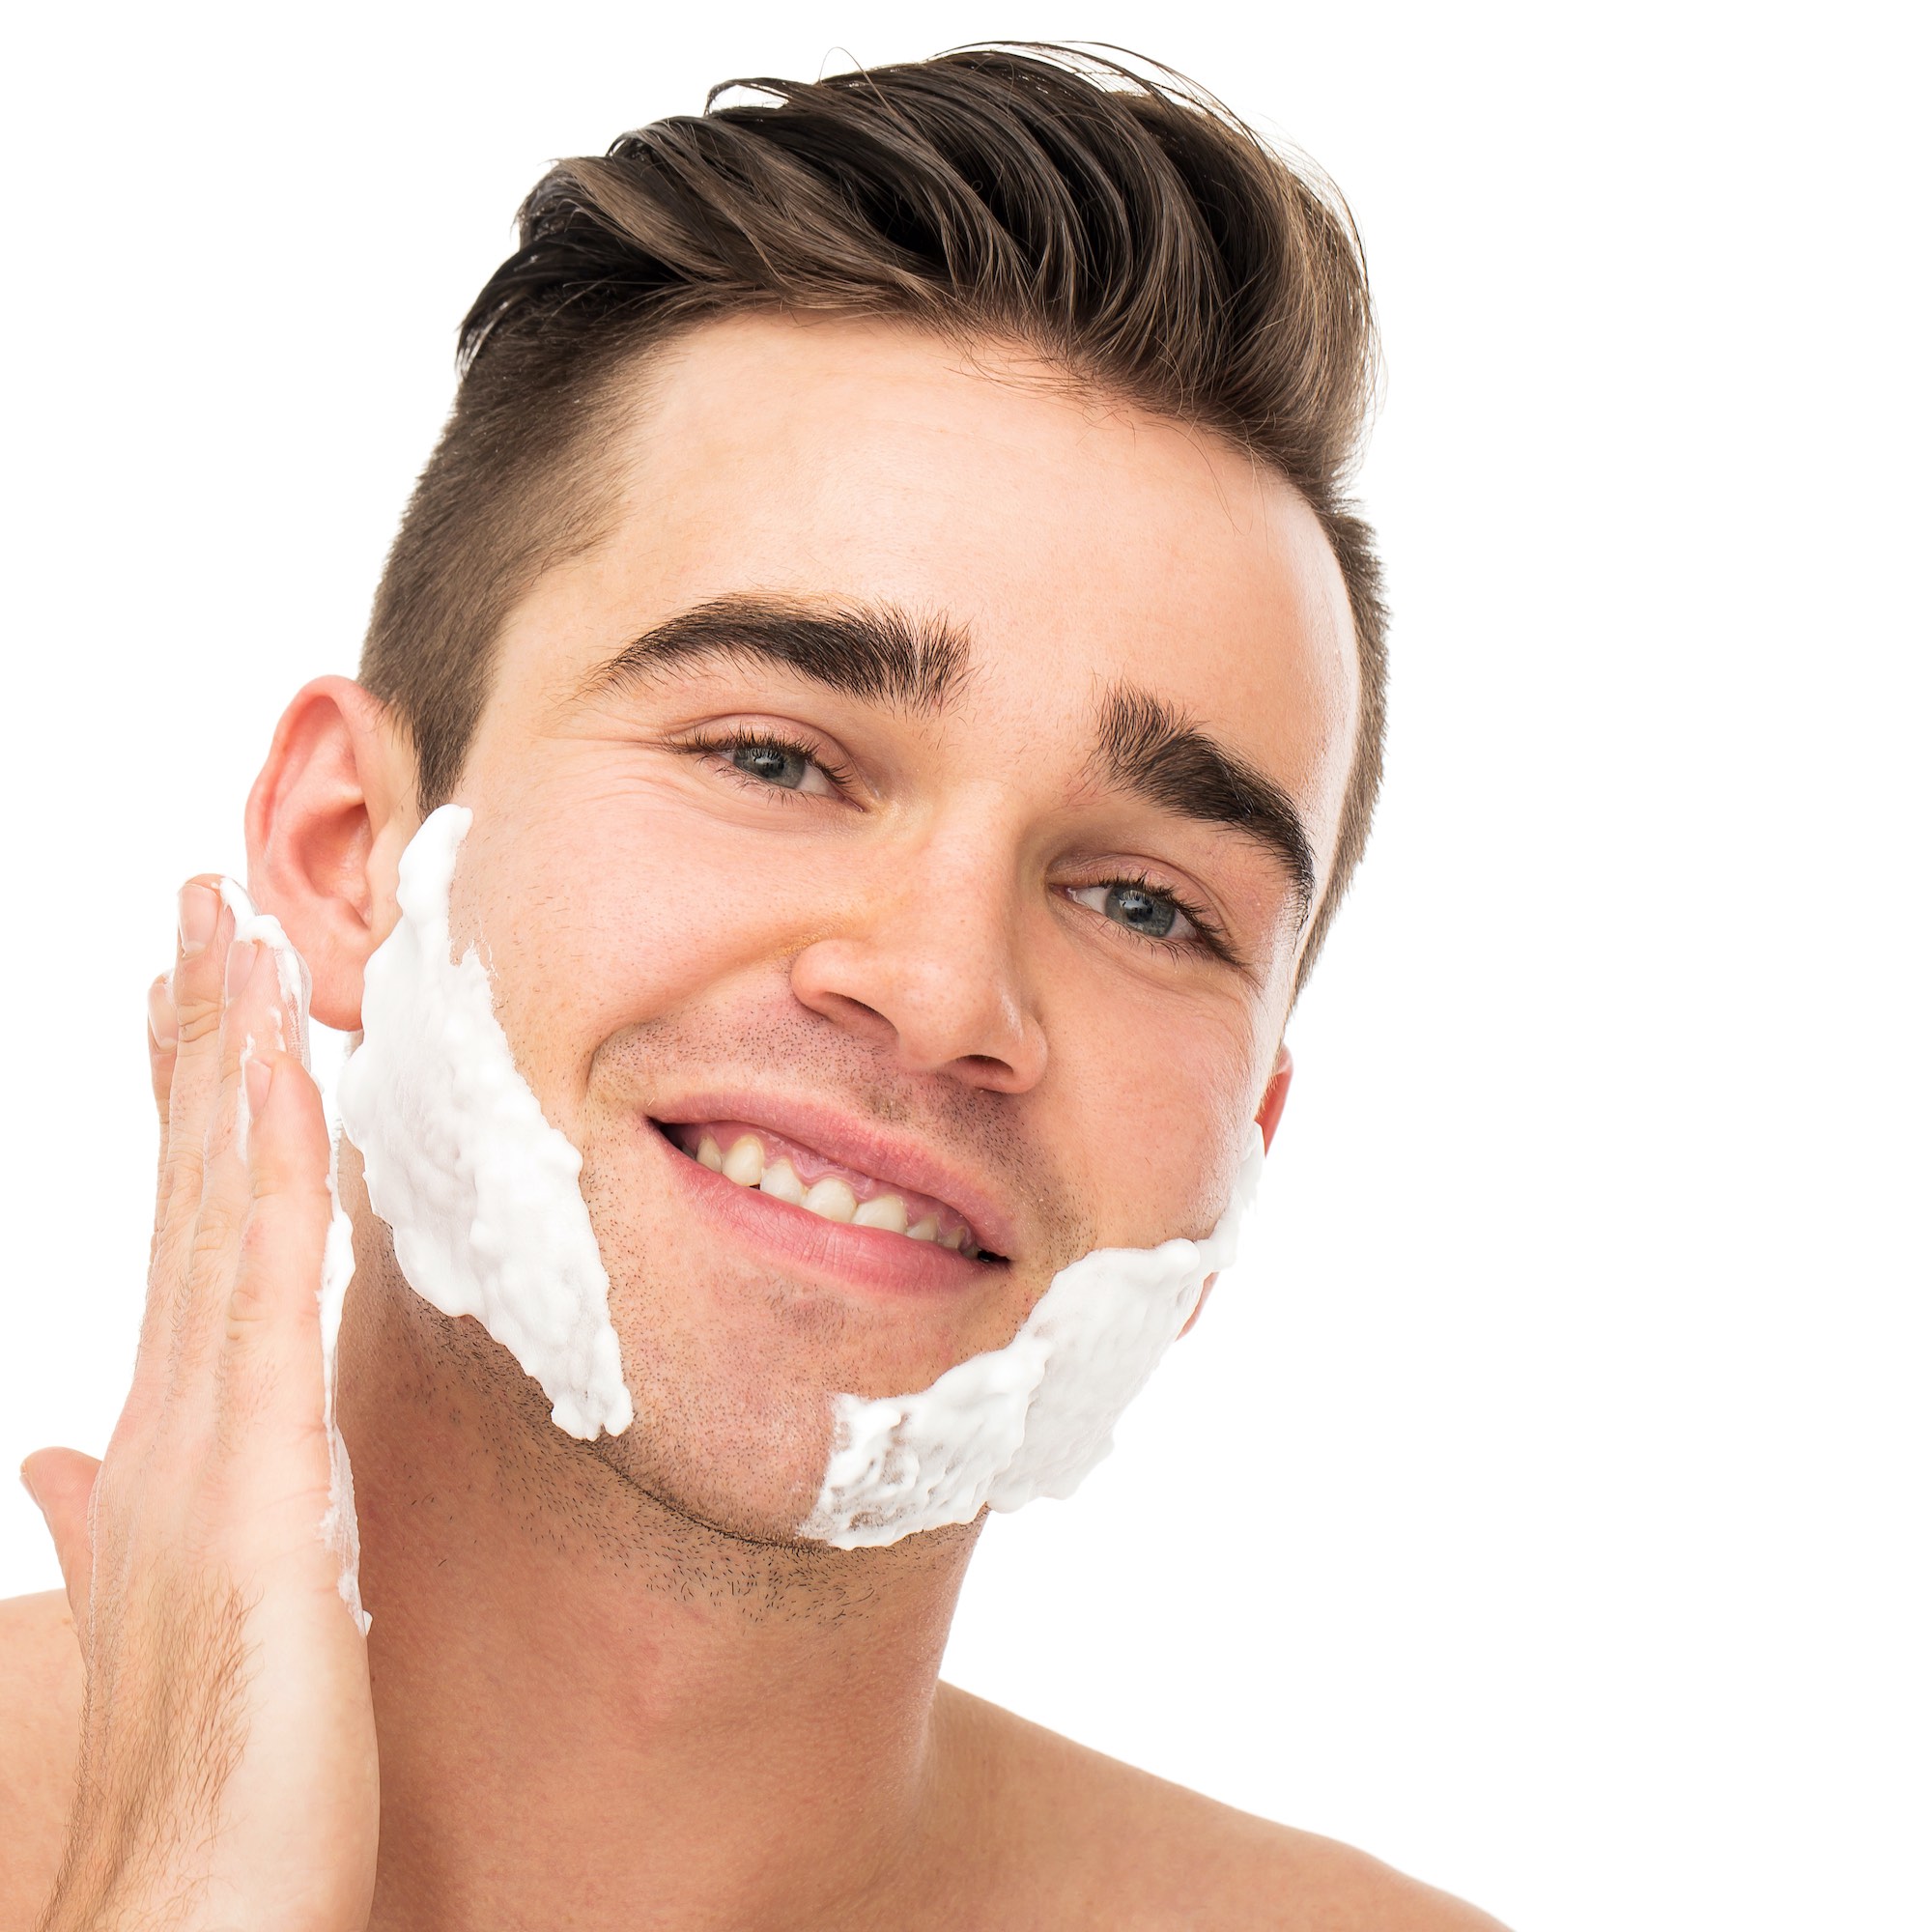 How To Expertly Build a Men's Skin Care Routine